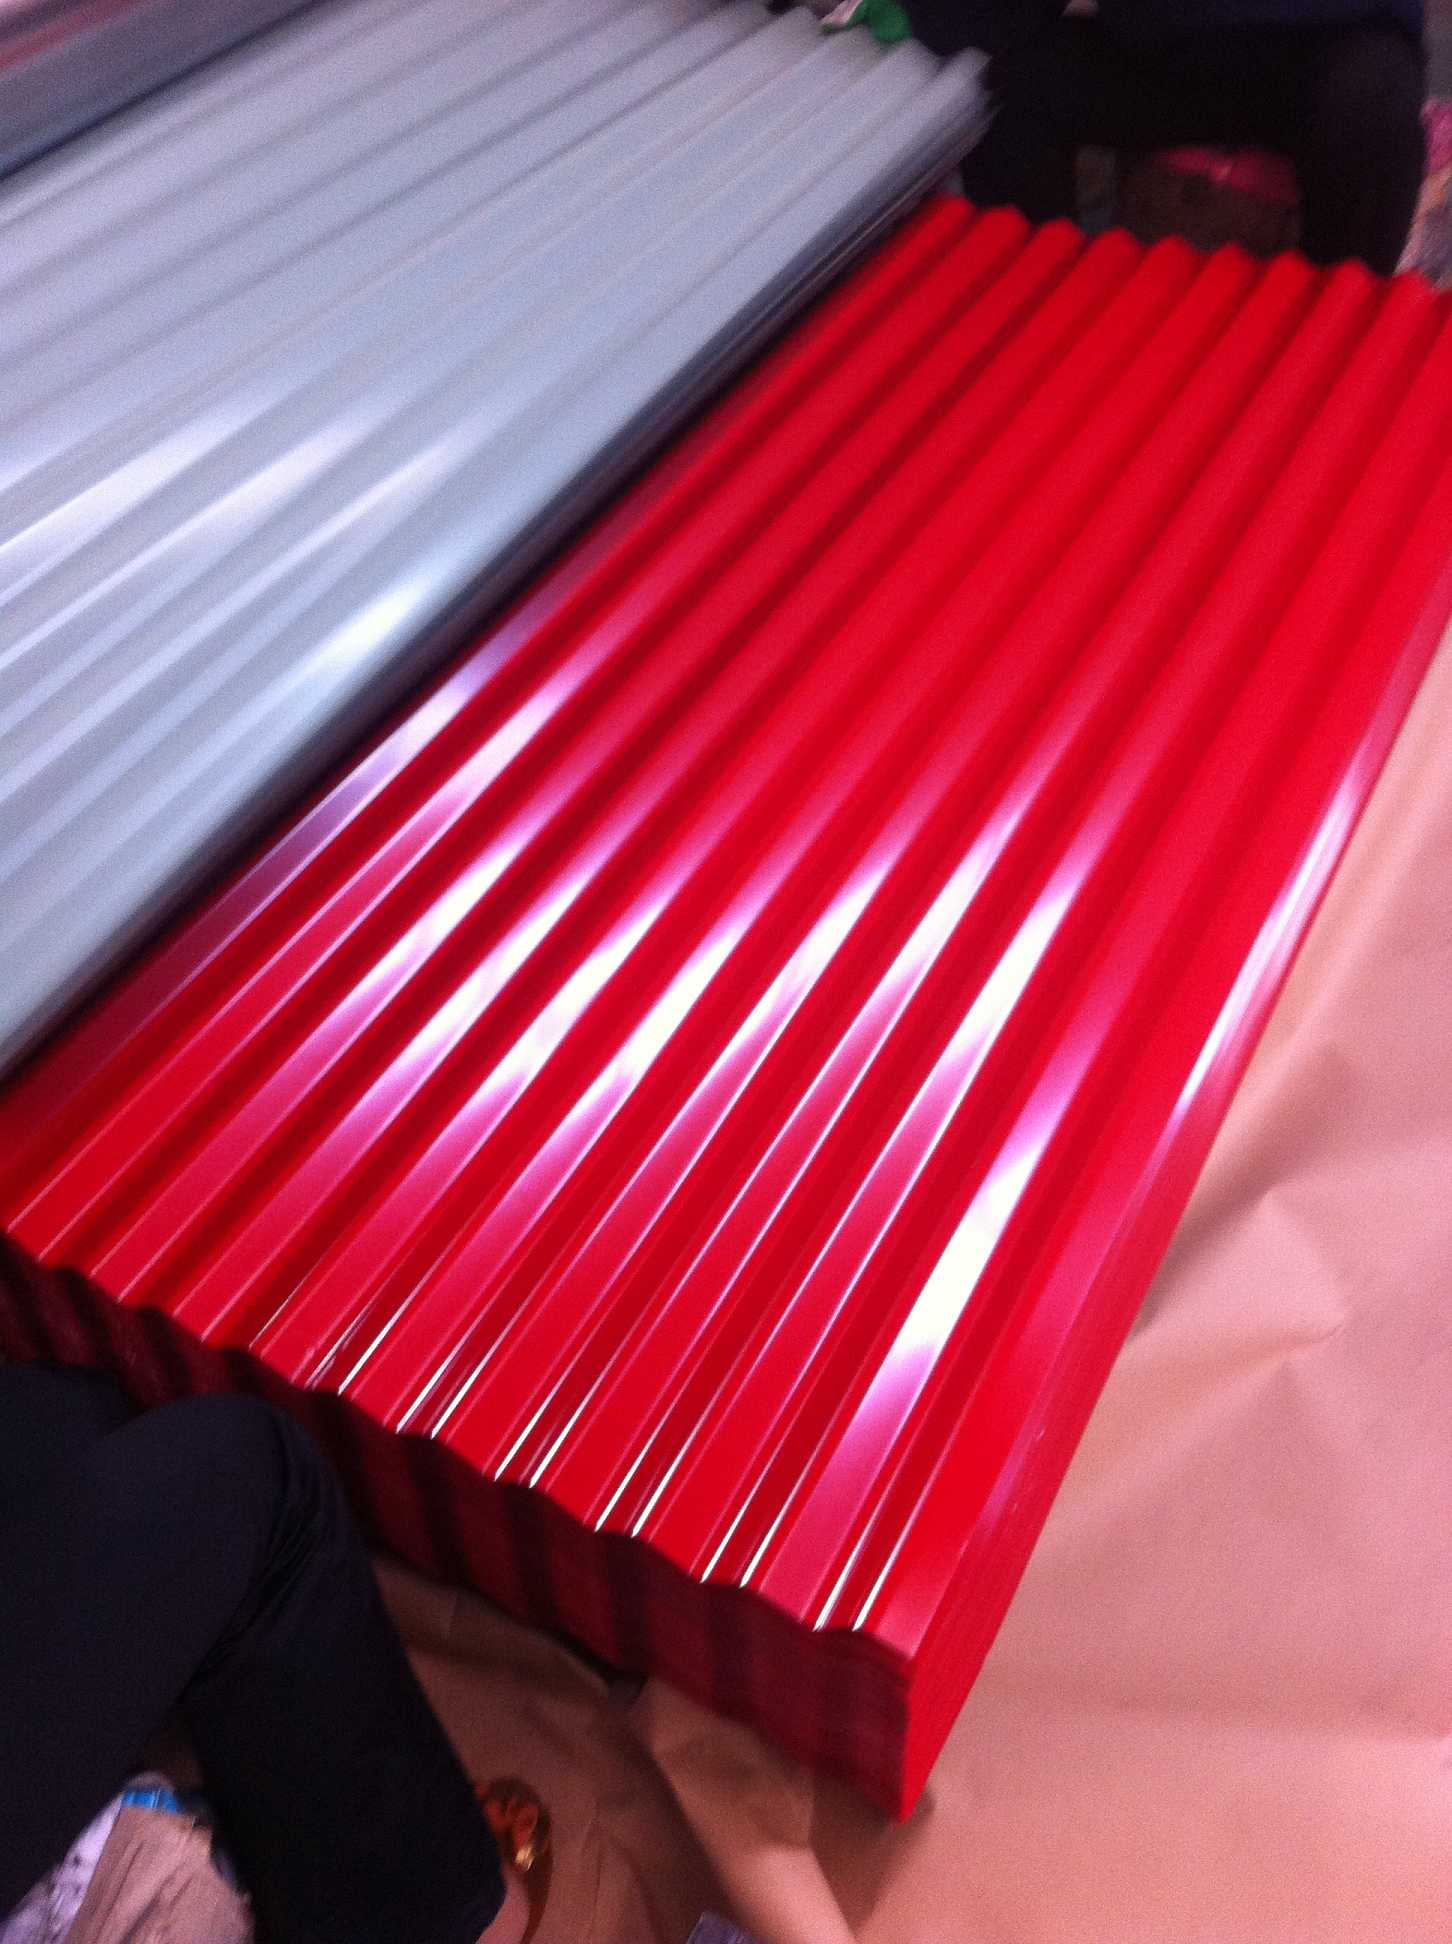 ASTM/AISI HDP Cold/Hot Rolled Dipped Ral Color PE/SMP/HDP Zinc Aluminium/Aluminum Gi PPGI Prepainted Galvanized Steel Coil Sheet for Roofing/Roof Materis Price Featured Image